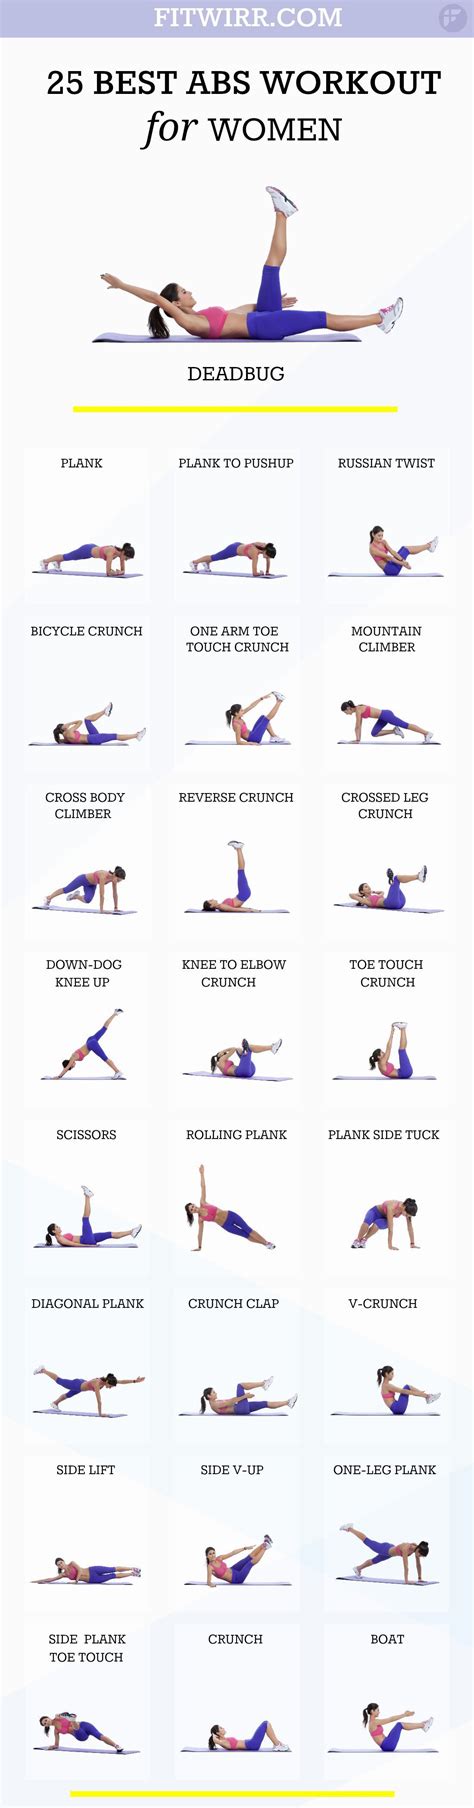 Flat Abs Workout Challenges â 5 Best Abs Infographics Abs Workout